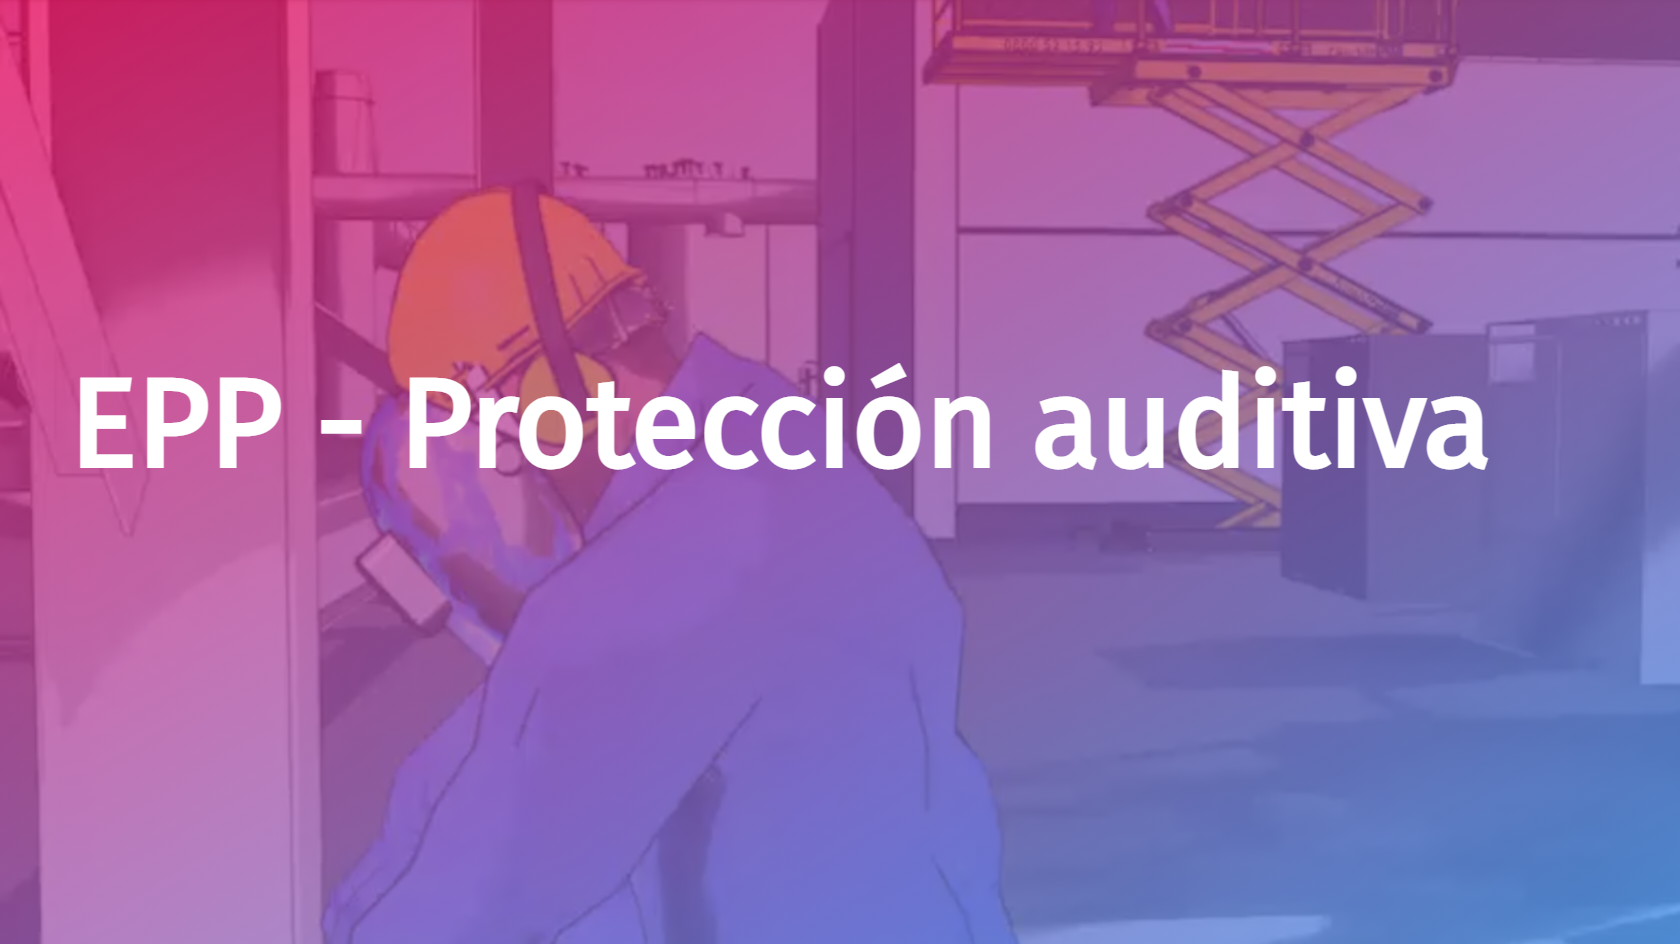 Spanish - PPE - Hearing Protection